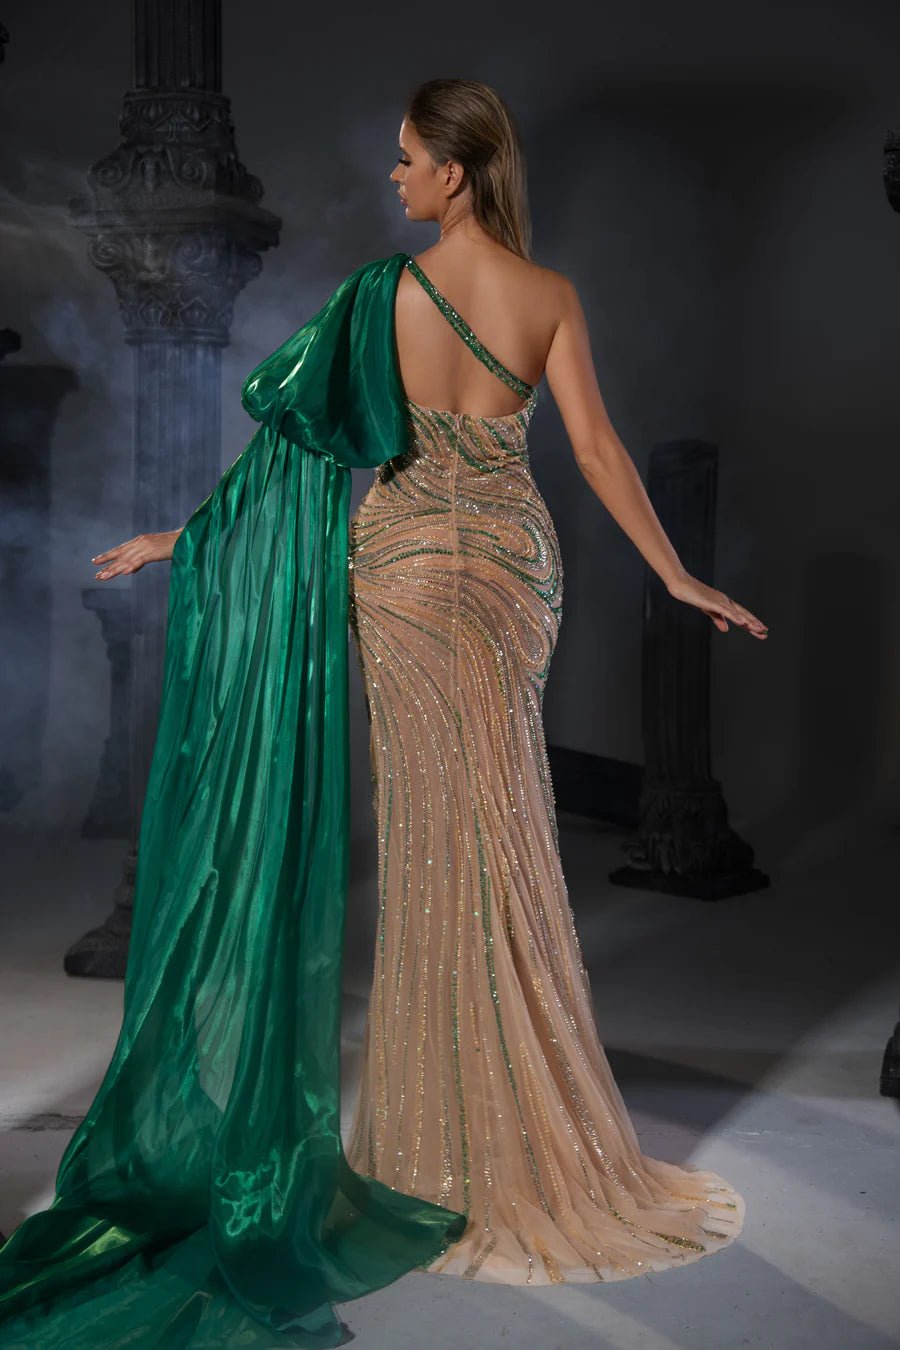 Gothic Green Sequin Evening Gown with Off-Shoulder Design and Tulle Overlay - Designer Sequin Gown and Glitter Dress Plus Size - WonderlandByLilian